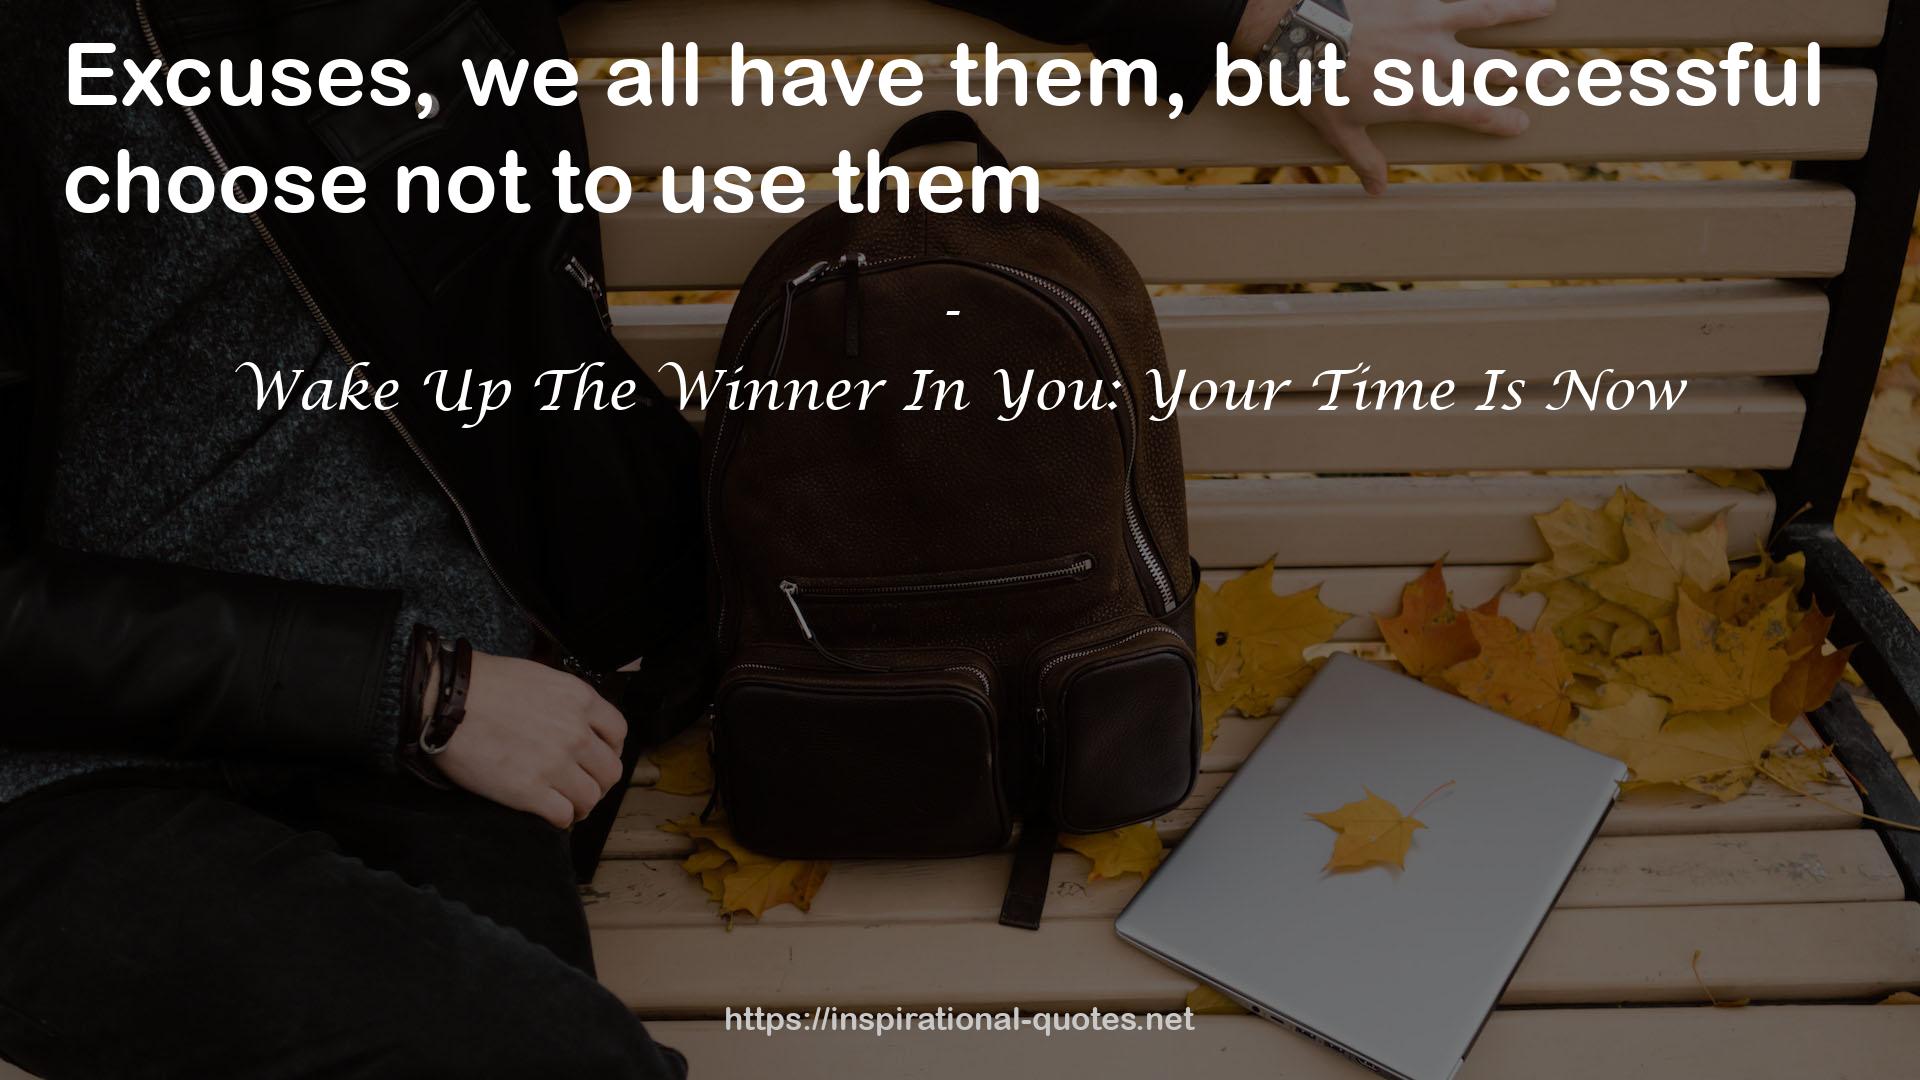 Wake Up The Winner In You: Your Time Is Now QUOTES